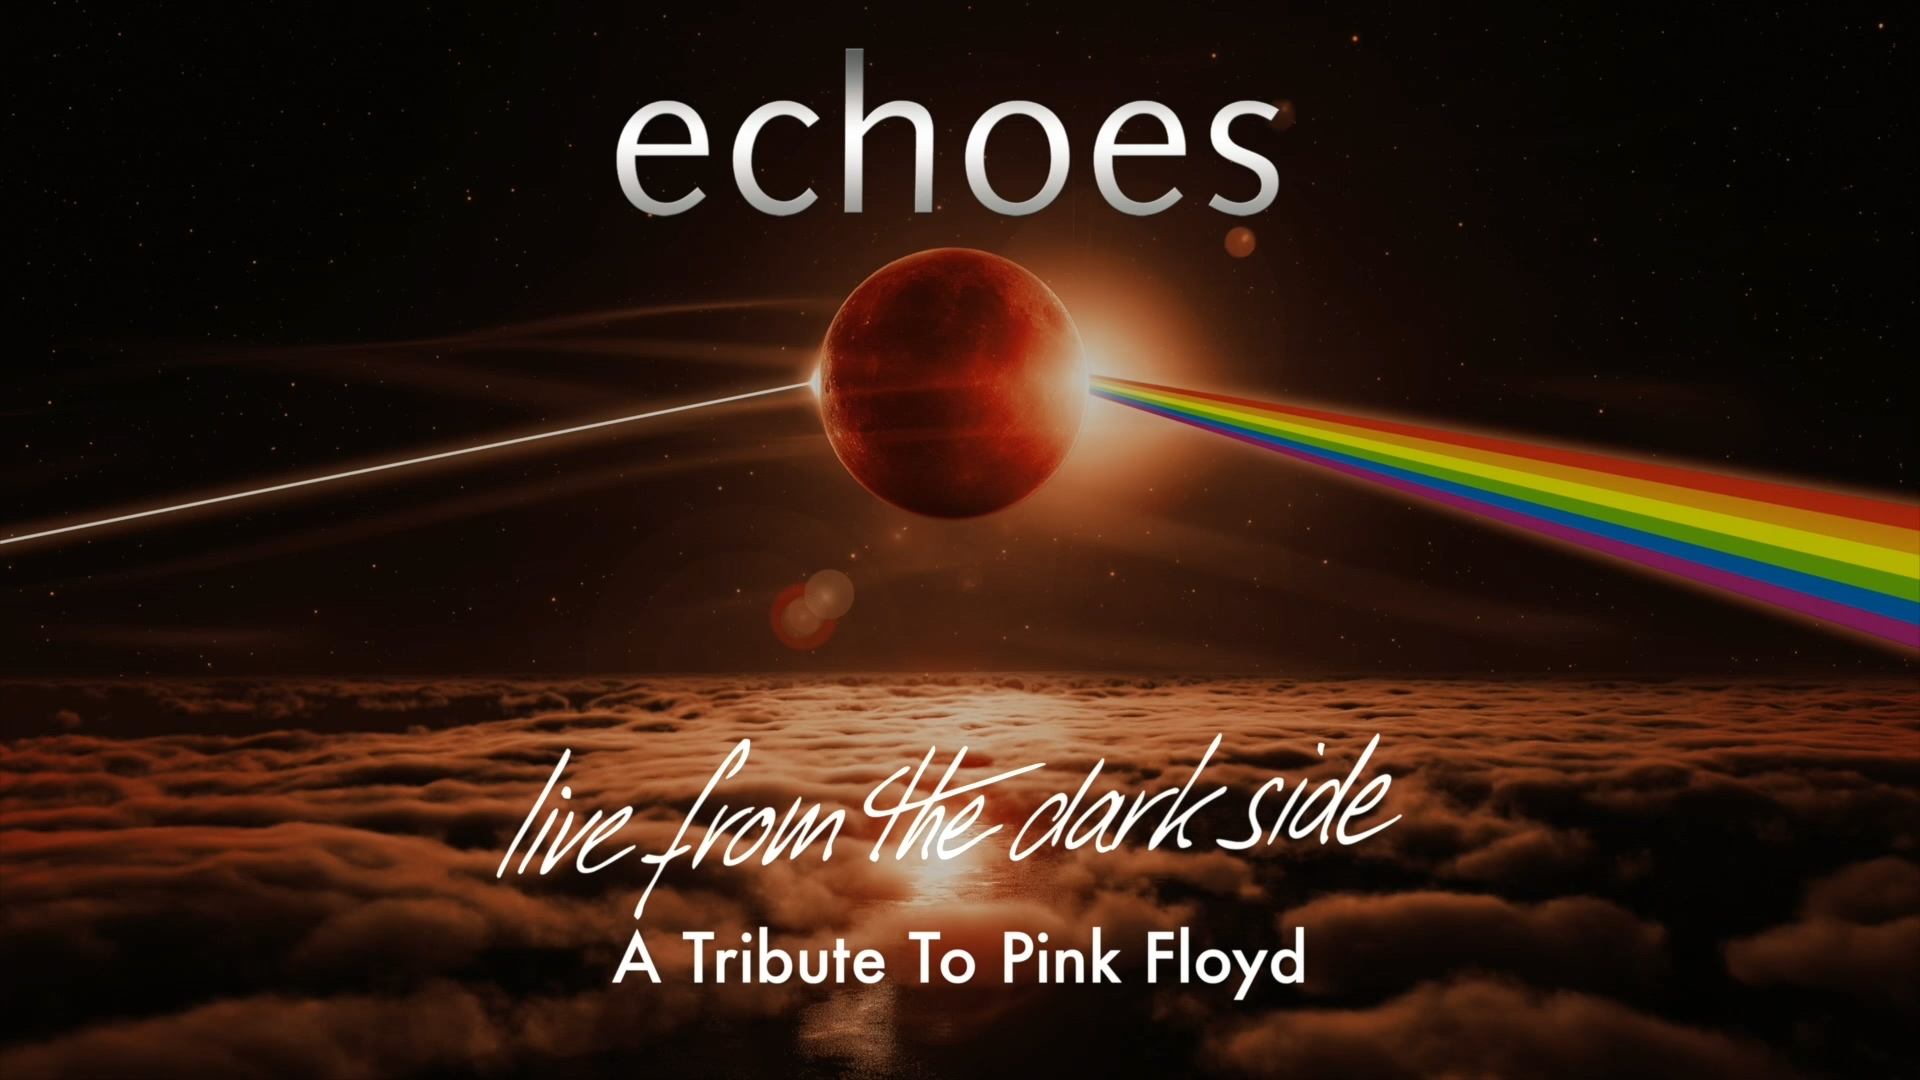 00002.m2ts(Echoes Live From The Dark Side (A Tribute To Pink Floyd) Bluray)_20190326_183243.476.jpg